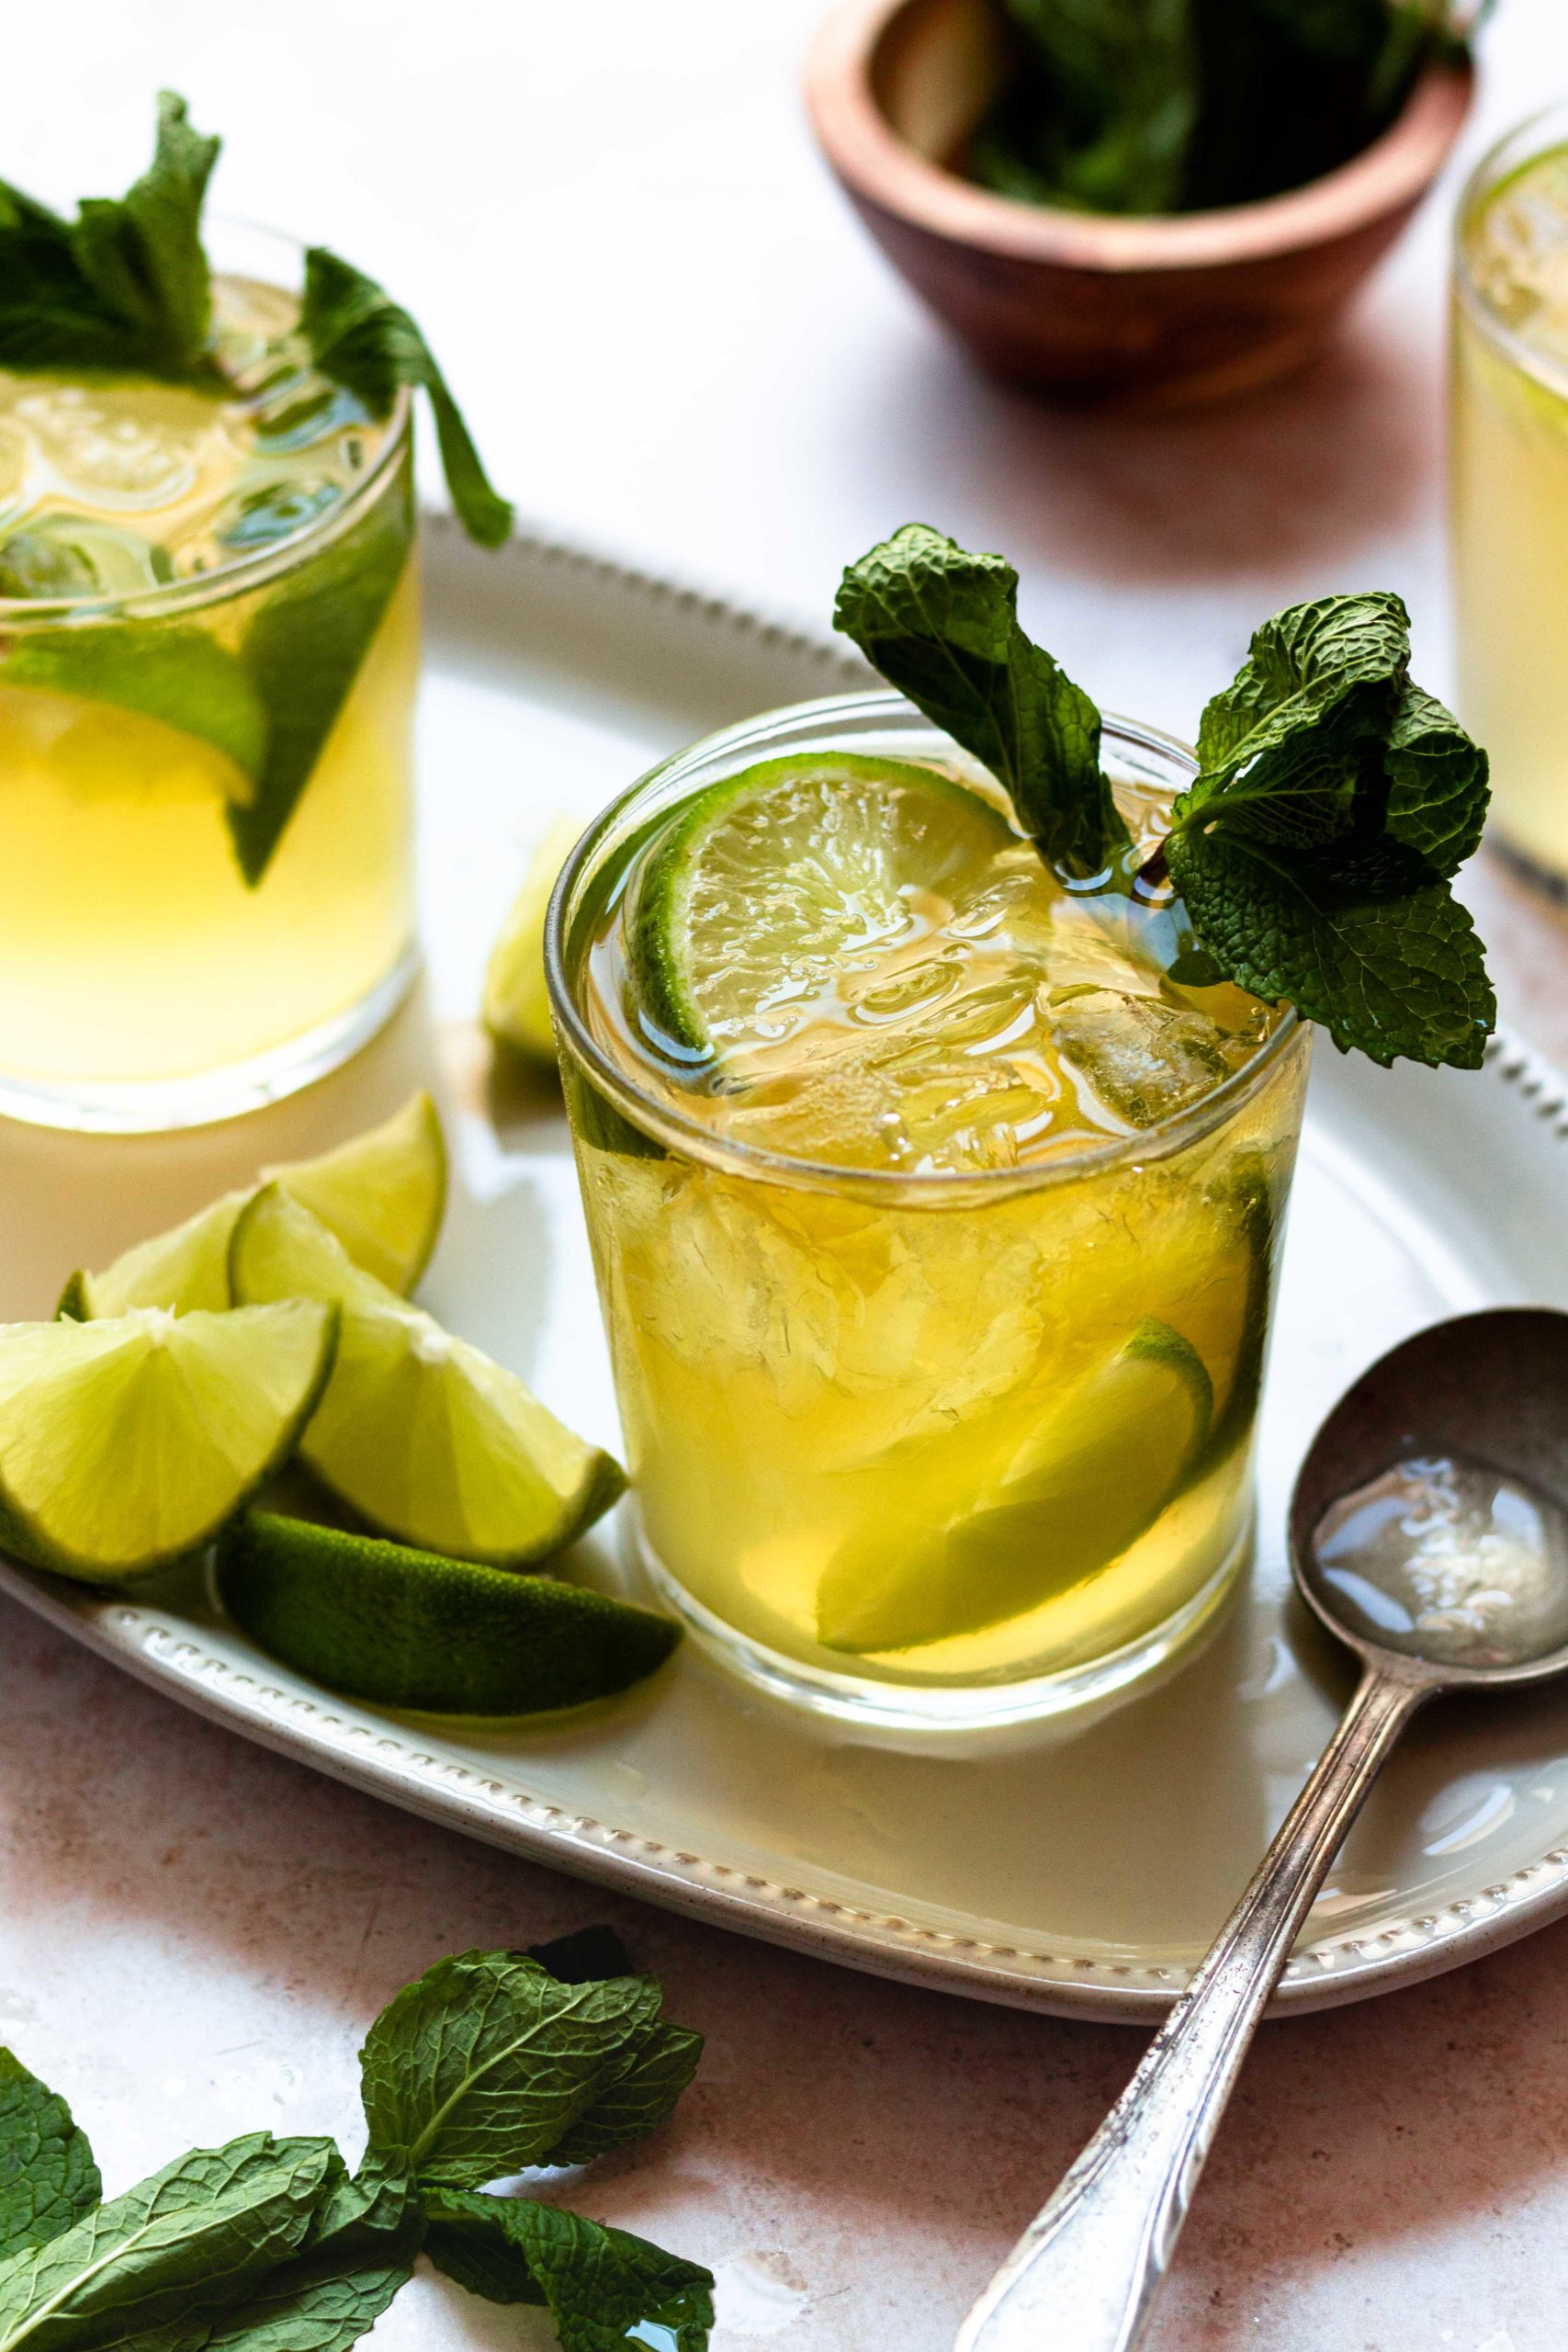 Everything you love about a mojito but with ginger and whiskey! Mint and lime muddled together and mixed with Irish whiskey and ginger beer to create a tasty and refreshing drink for St. Patrick’s Day or any day!